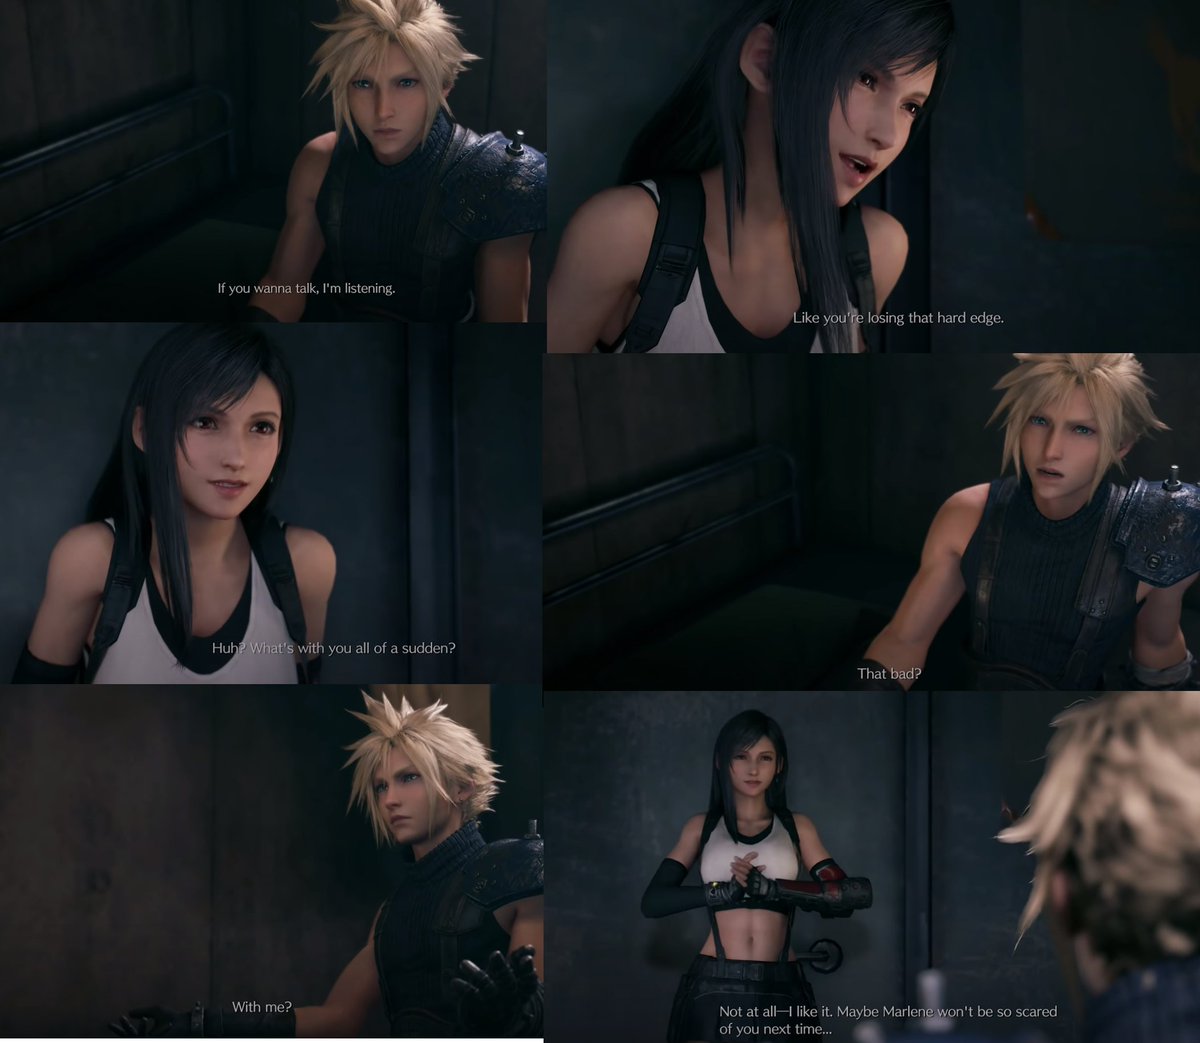 This FF7R scene in Cloud's room is new, as well as new character Marle, who tells Cloud to listen to Tifa. He does this & Tifa notices, calling him out for "losing his hard edge" & then we get the famous tension filled scene between the 2 & Cloud whispering "Goodnight Tifa."